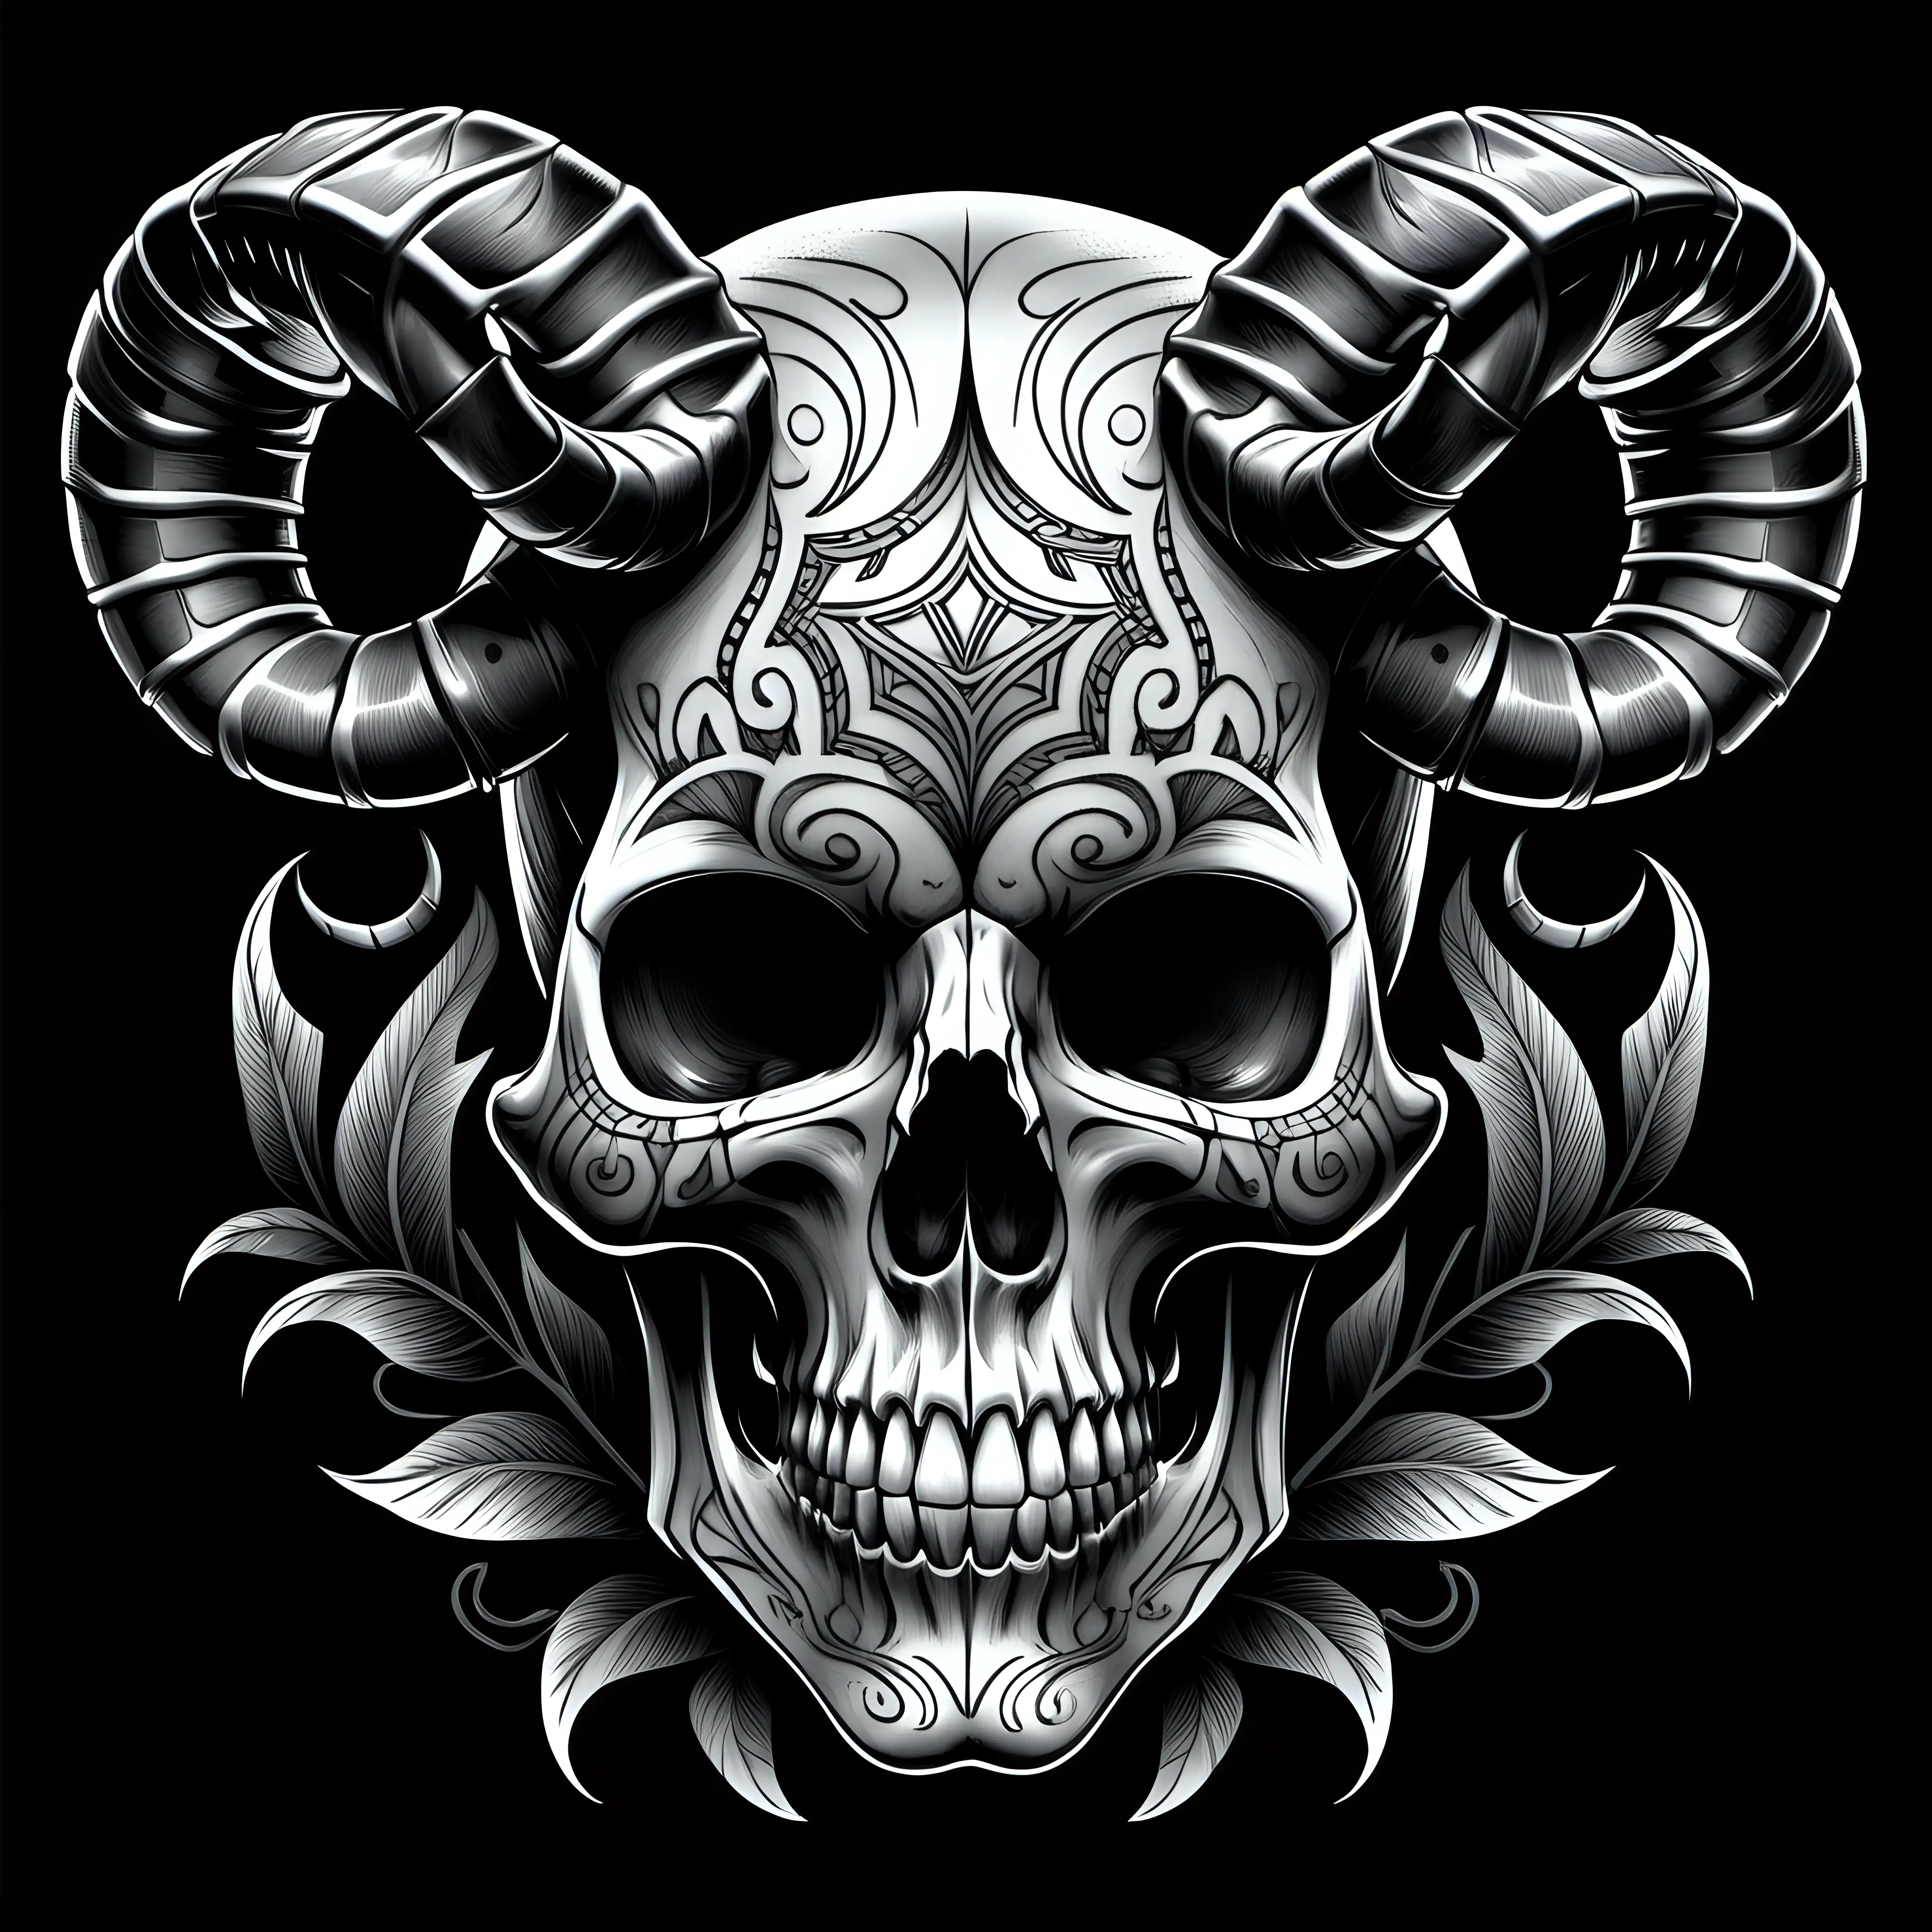 "Generate a striking and detailed outline of a tattooed female skull with prominent, curved horns with a Black background. The female skull should have clean and well-defined lines, emphasizing both the structure of the skull and the imposing nature of the horns, along with the tattoos. Ensure that the horns are distinct and add an element of dark elegance to the overall composition. Consider using subtle shading or contrast to enhance the visual impact of the skull and rams  horns. The final image should evoke a sense of mystique and strength. Black back ground